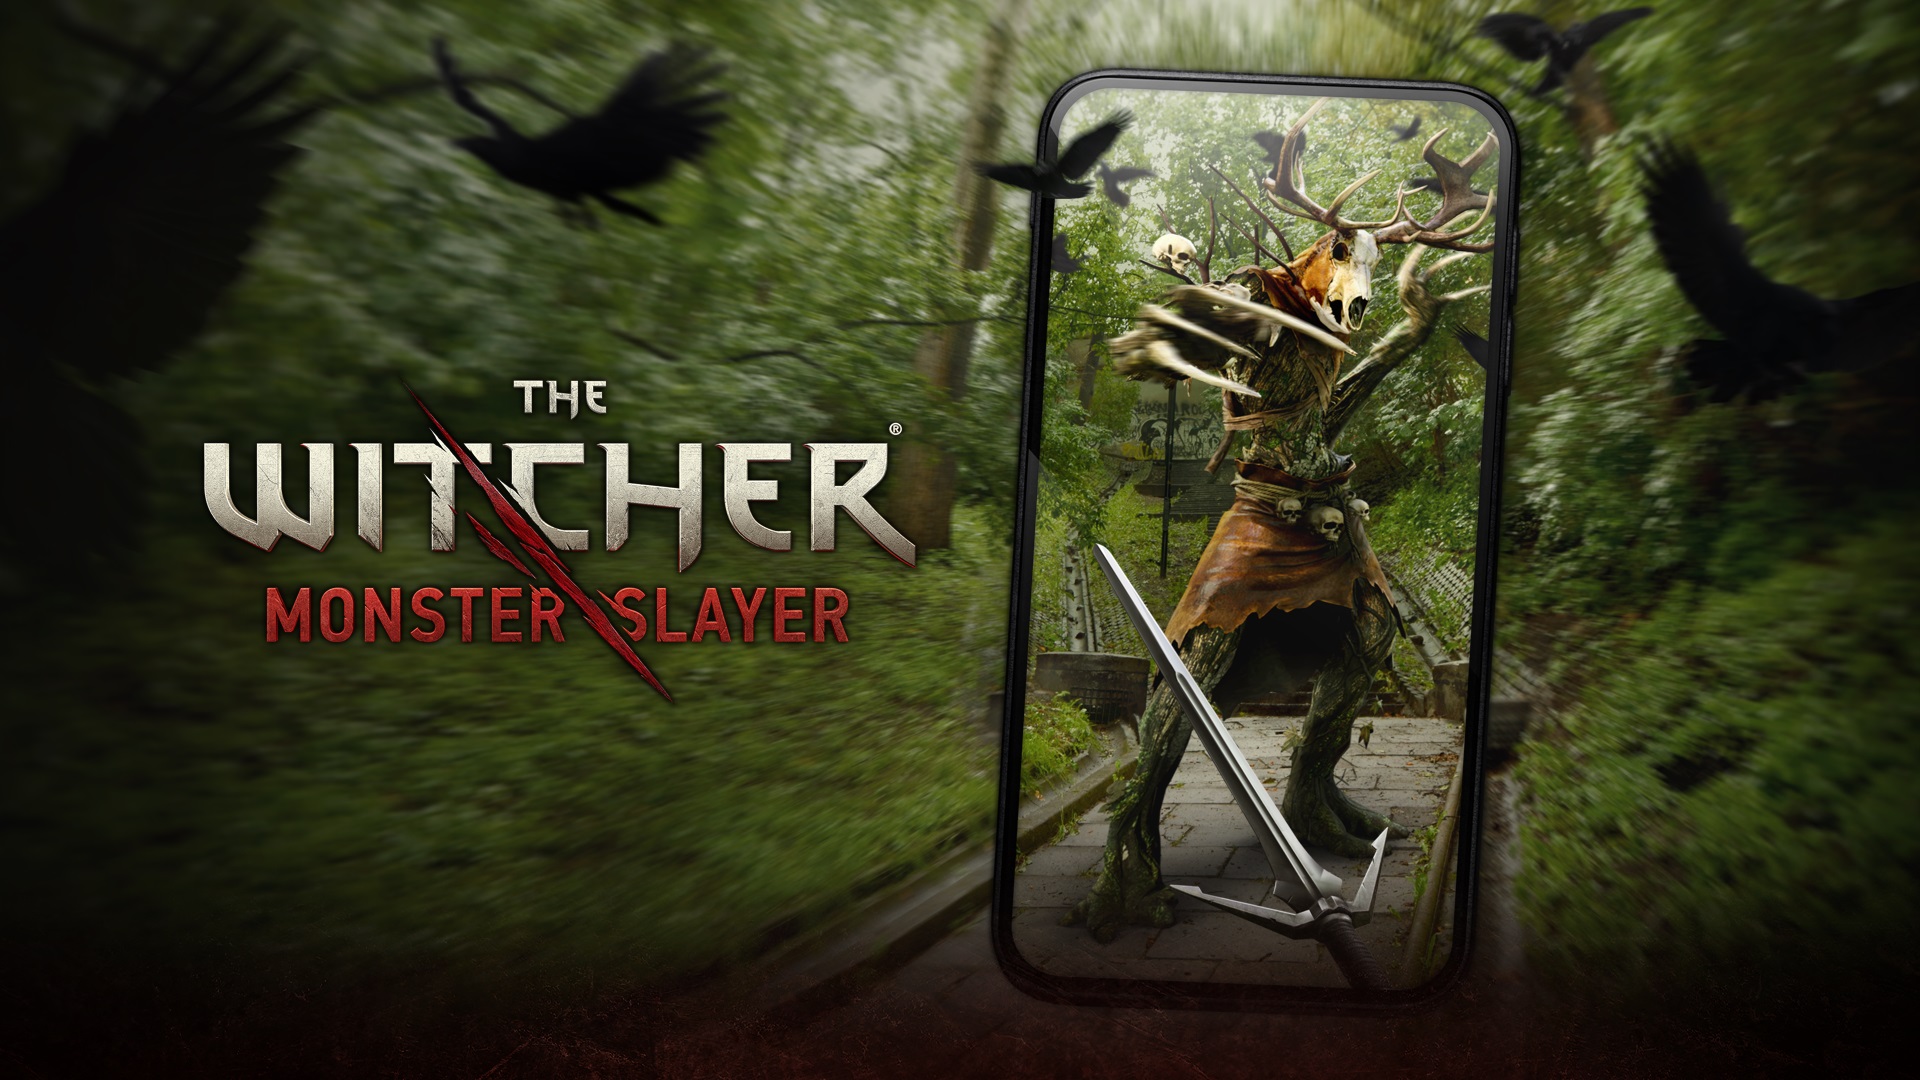 The Witcher: Monster Slayer - Registrations open on Android